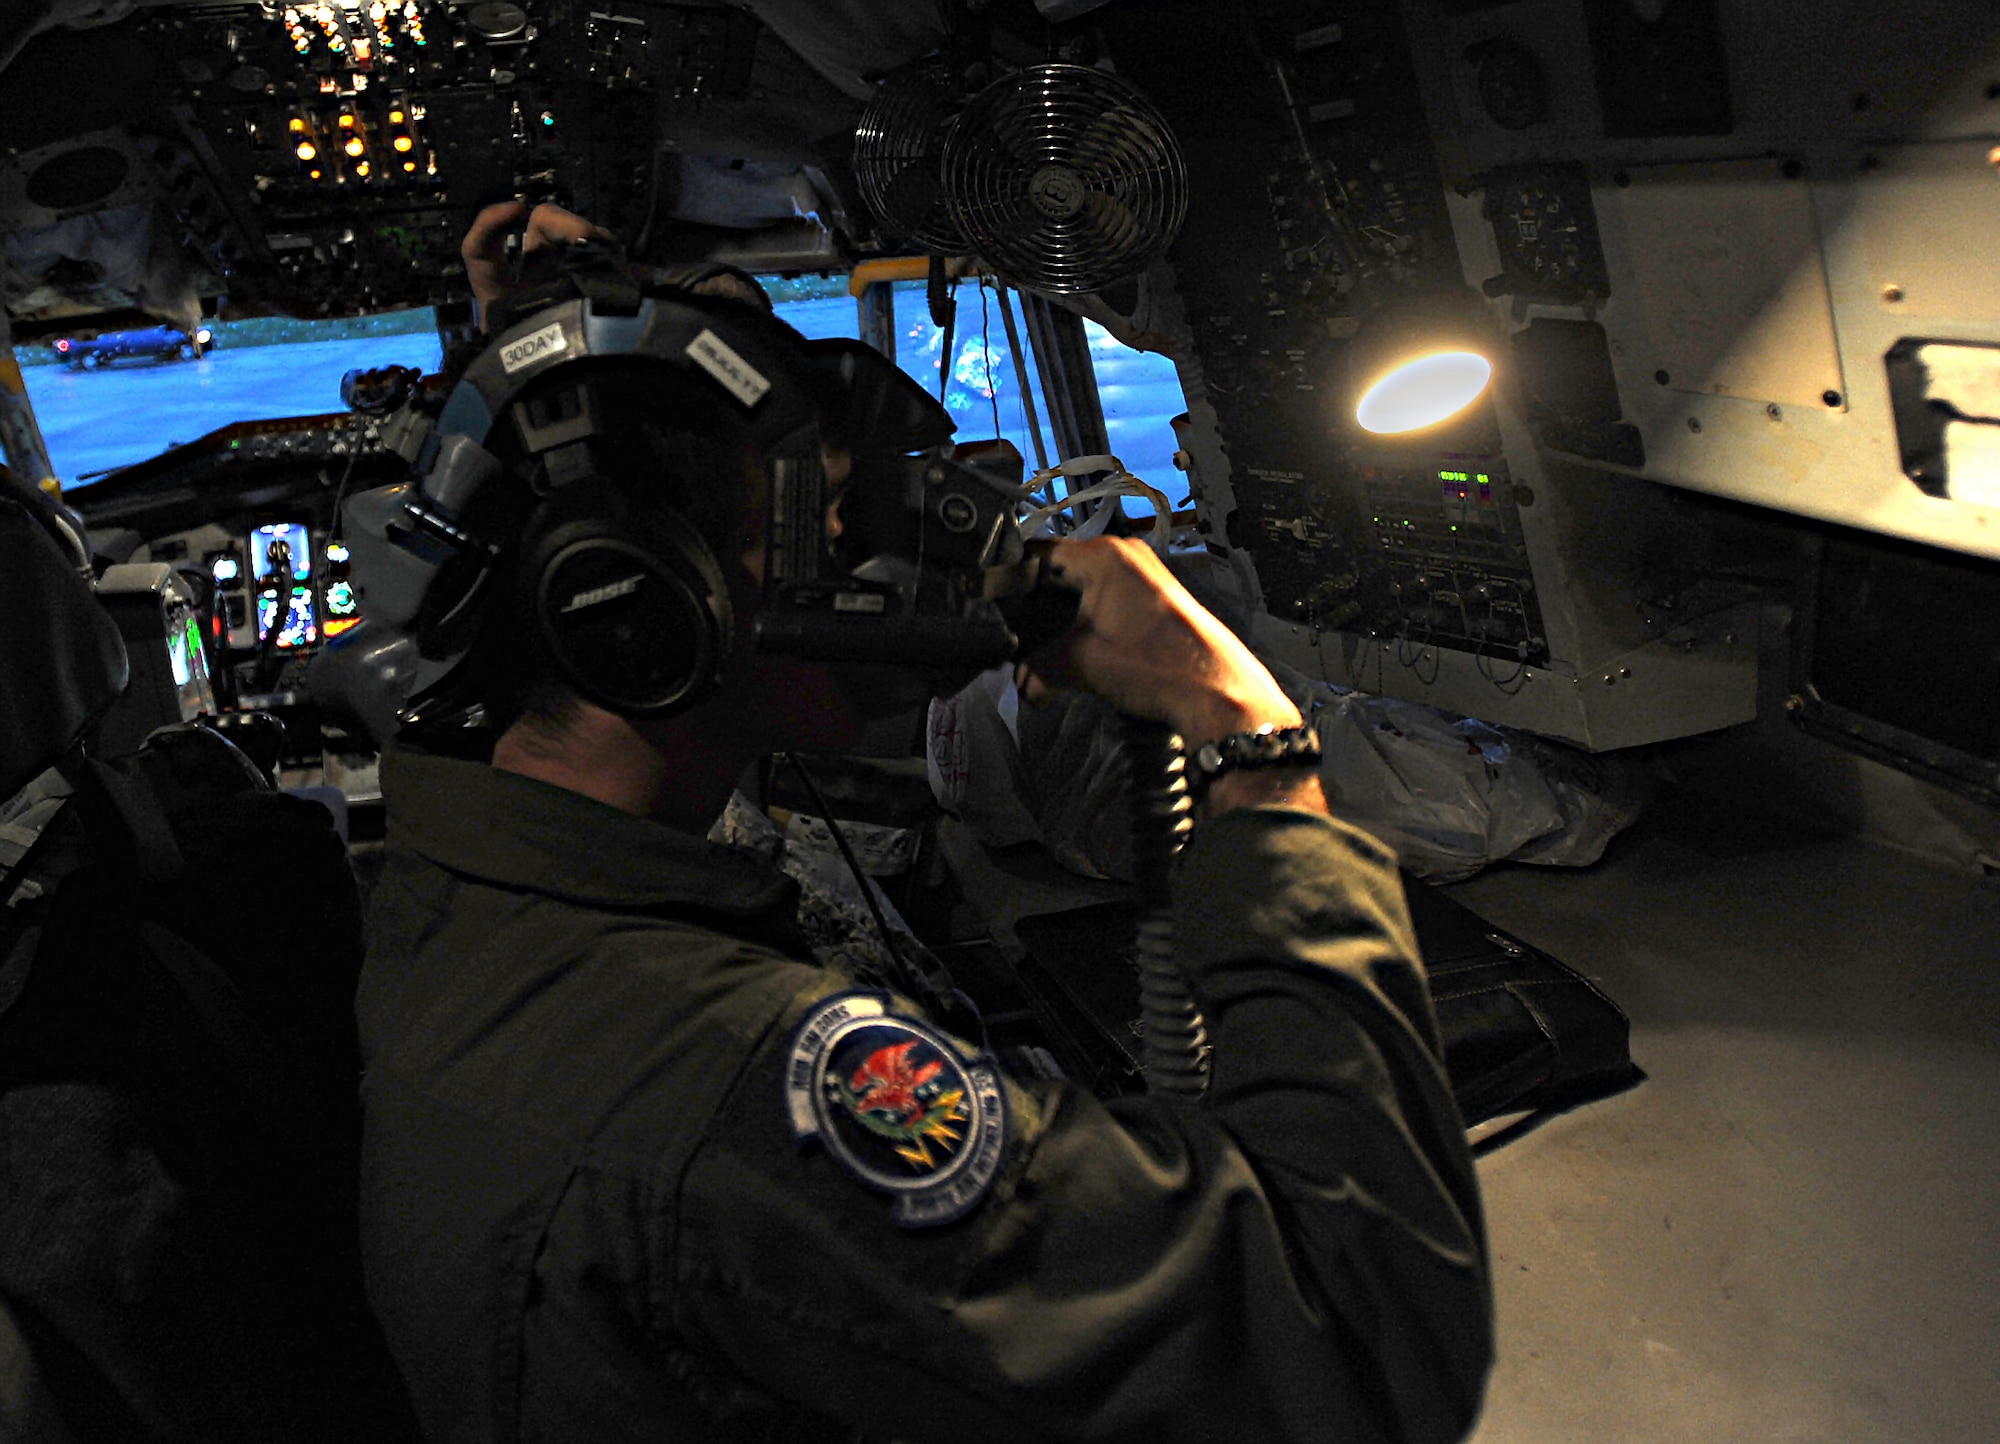 Airman 1st Class Patrick Napolitano, 350th Air Refueling Squadron boom operator, tests his oxygen mask before a refueling flight, July 12, 2017, at Eielson Air Force Base, Alaska. Before any flight, oxygen masks are tested as part of the boom operator’s pre-flight checklist. (U.S. Air Force photo/Staff Sgt. Rachel Waller)